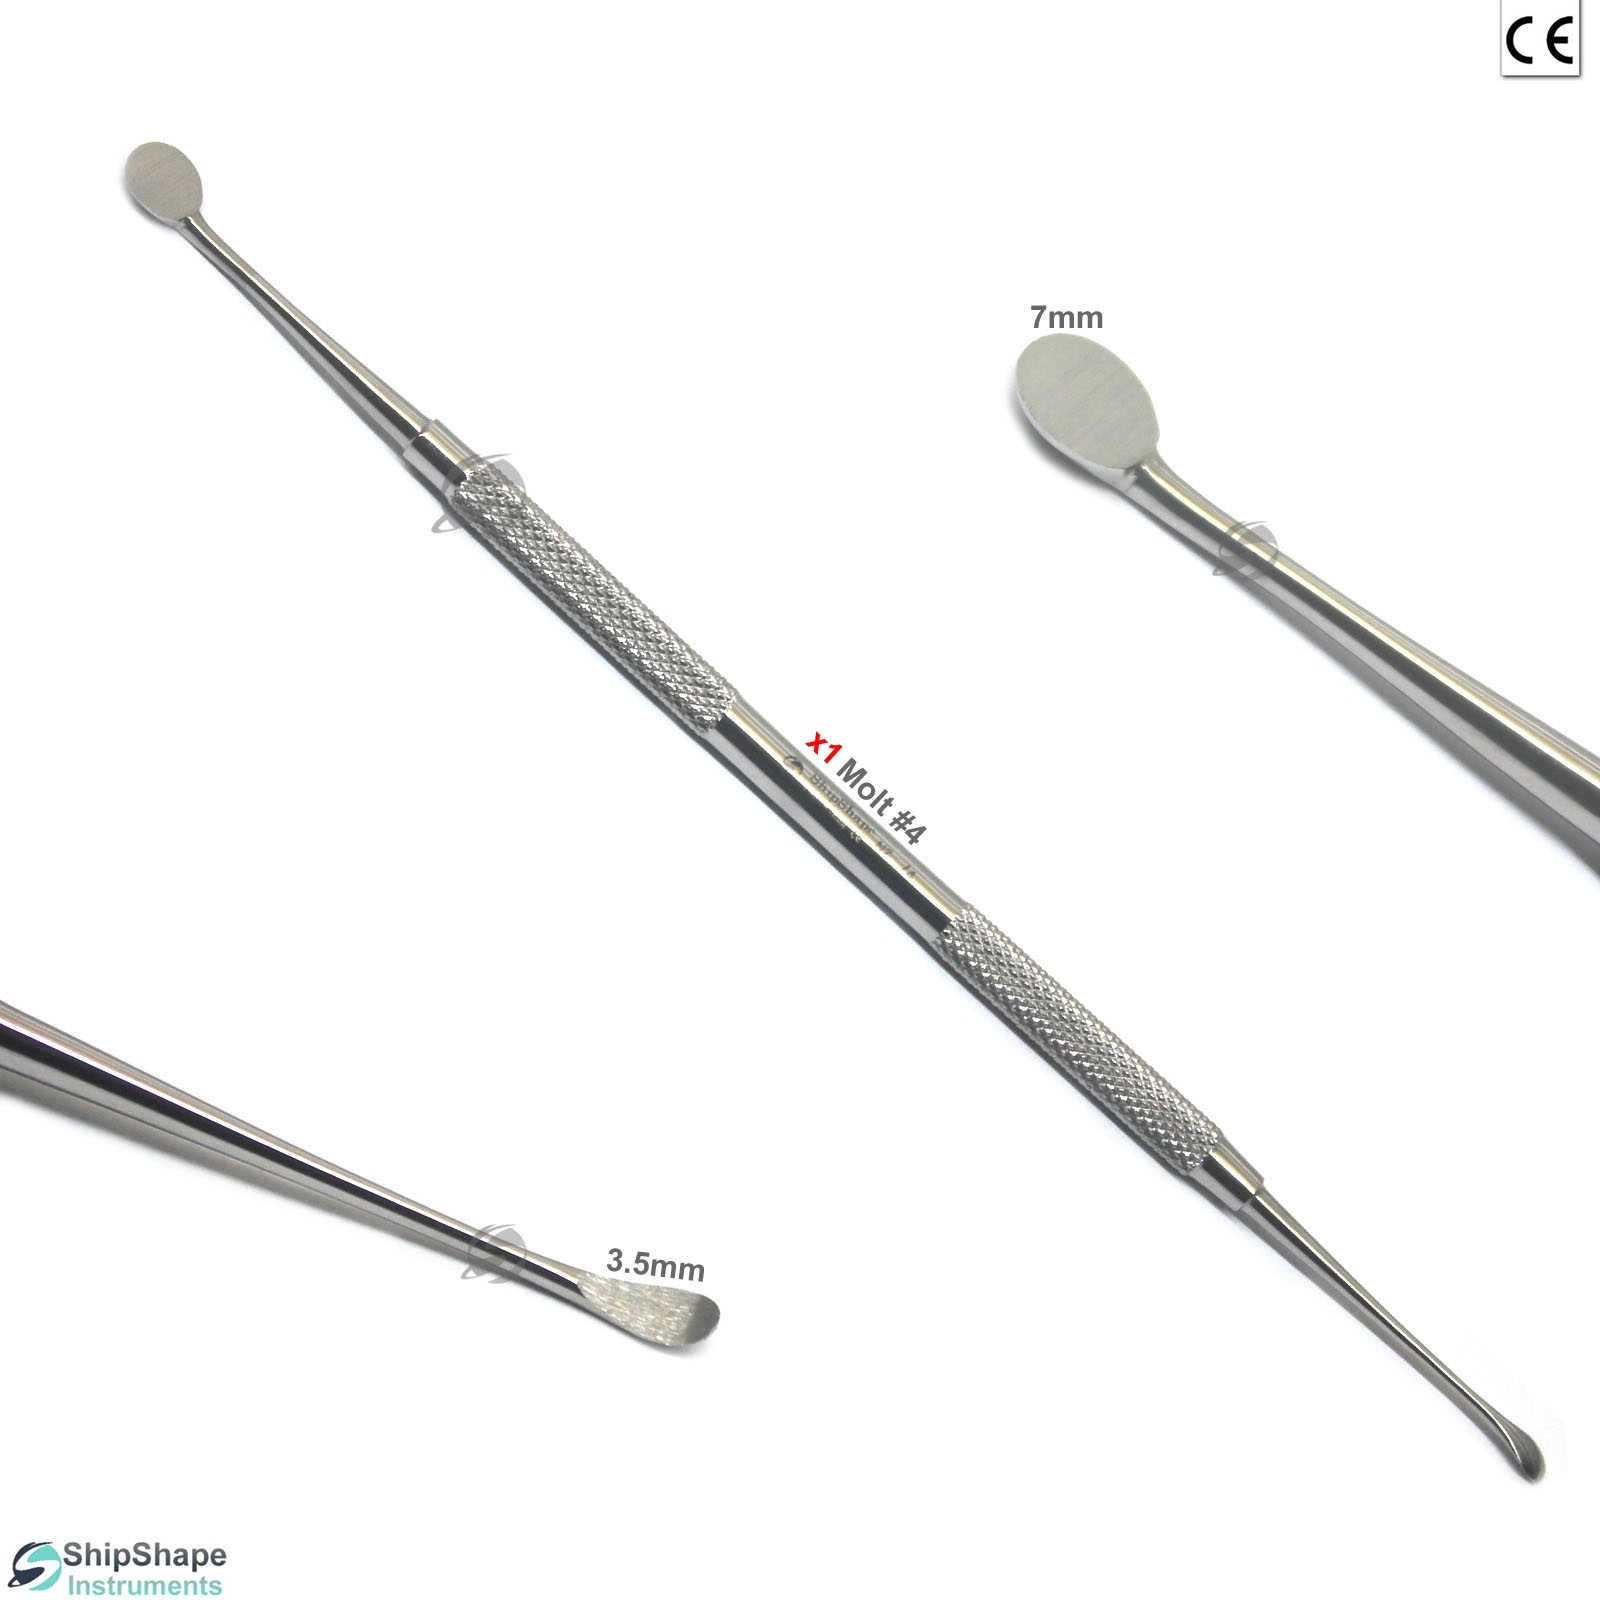 Periosteal Curette 2/4 Dental Periosteal Elevator #4 | Shipshape Instruments-0